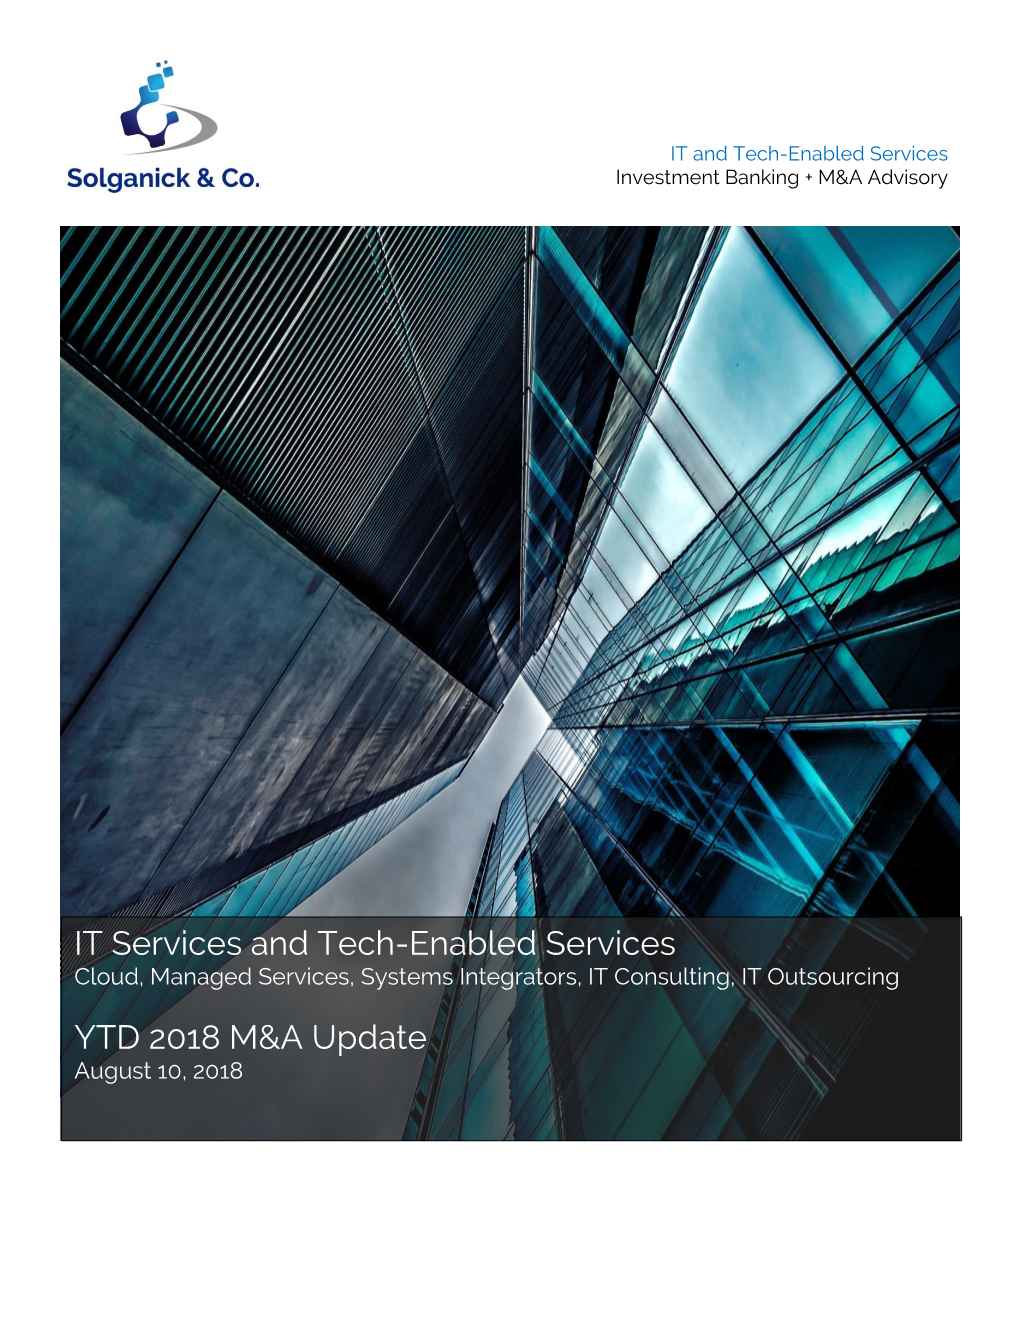 IT Services and Tech-Enabled Services YTD 2018 M&A Update